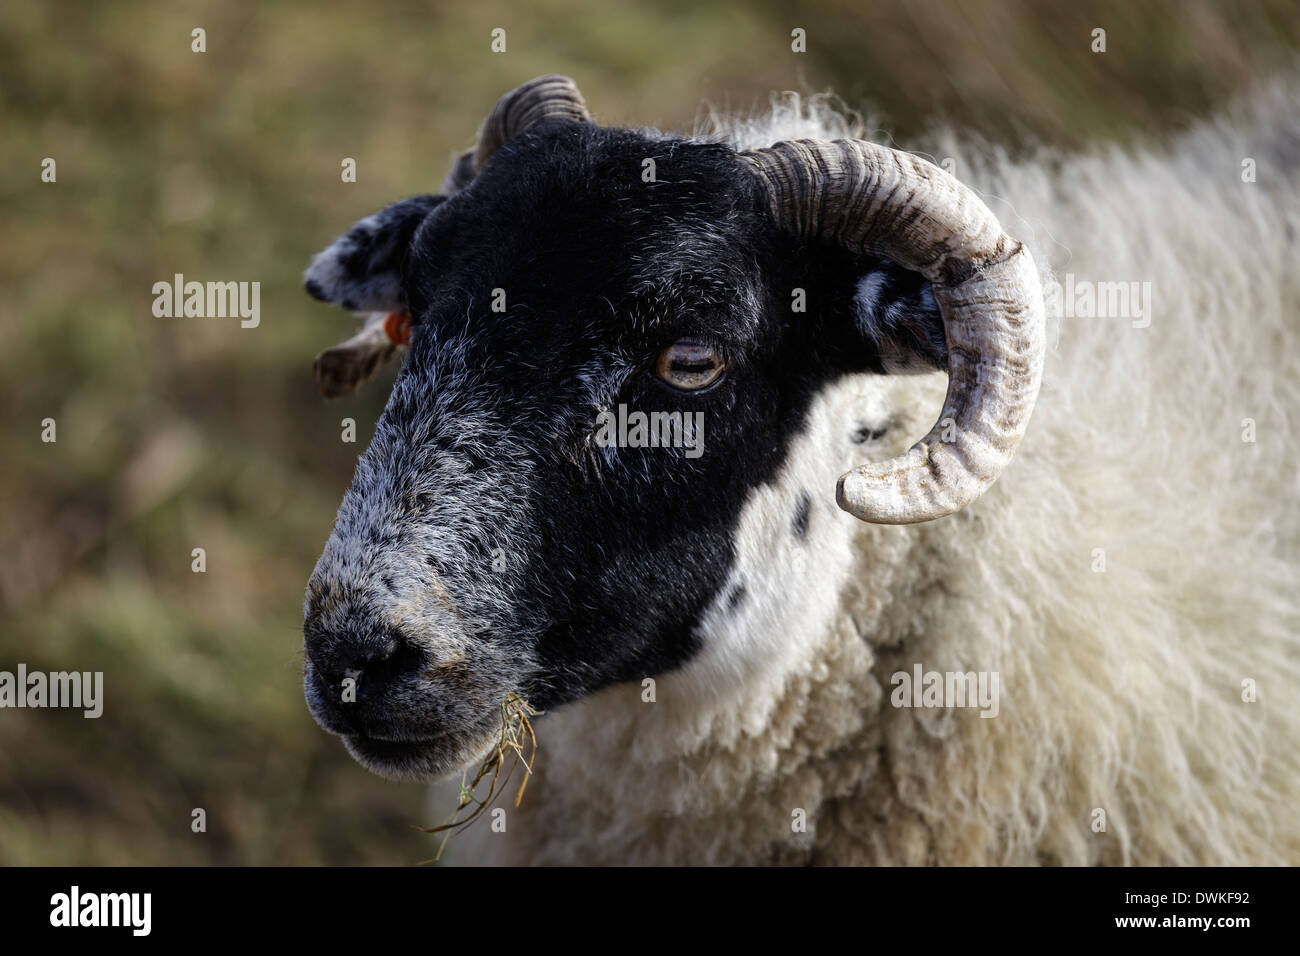 Close up of a sheep's head Stock Photo